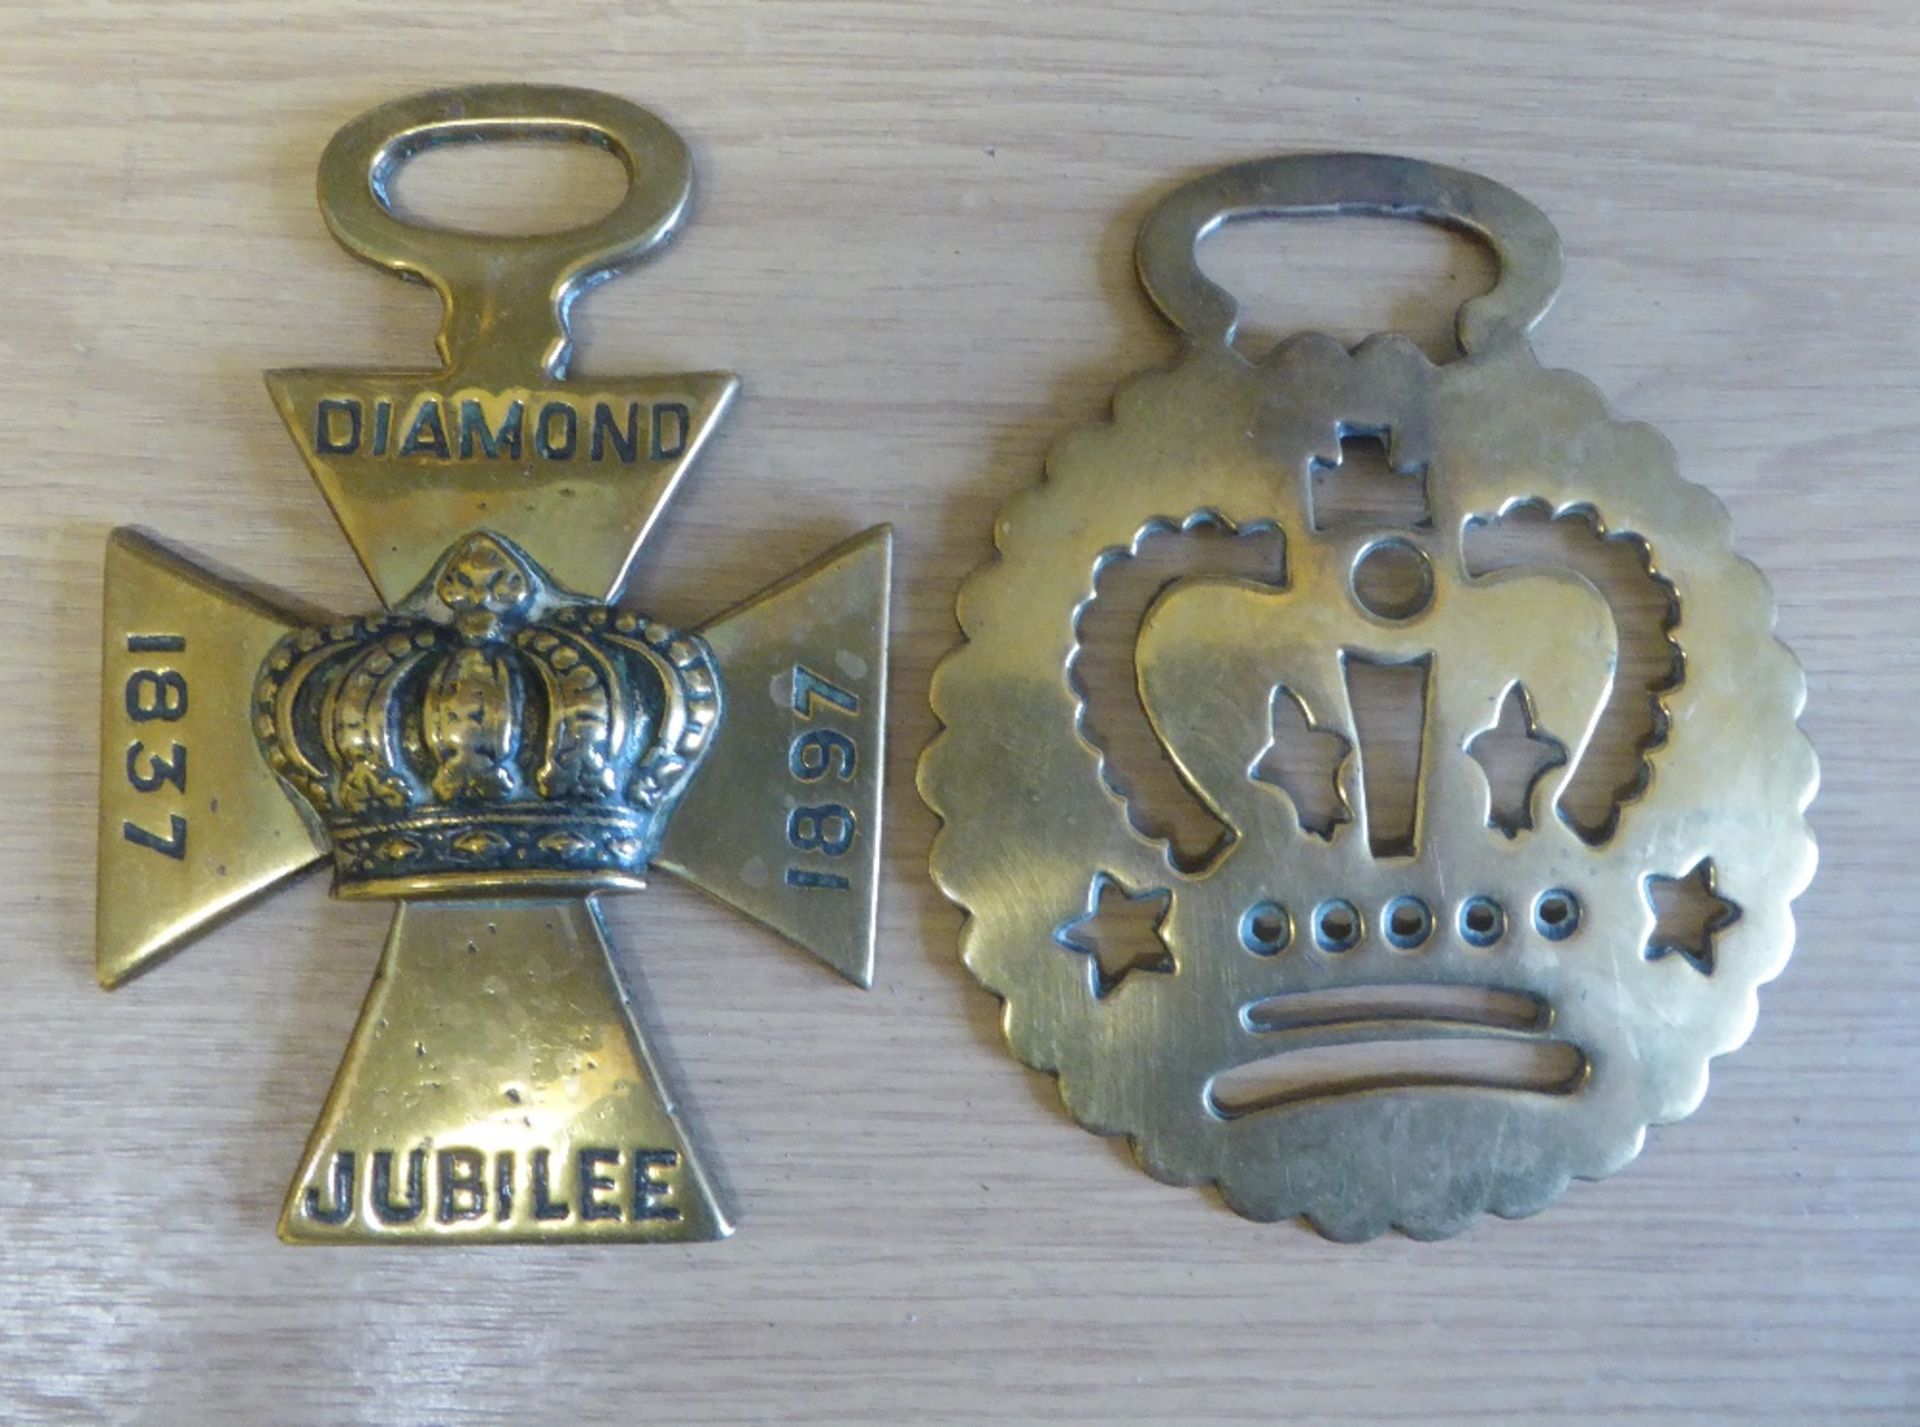 A Maltese Cross commemorative royalty brass - Diamond Jubilee 1837-1897; and another brass